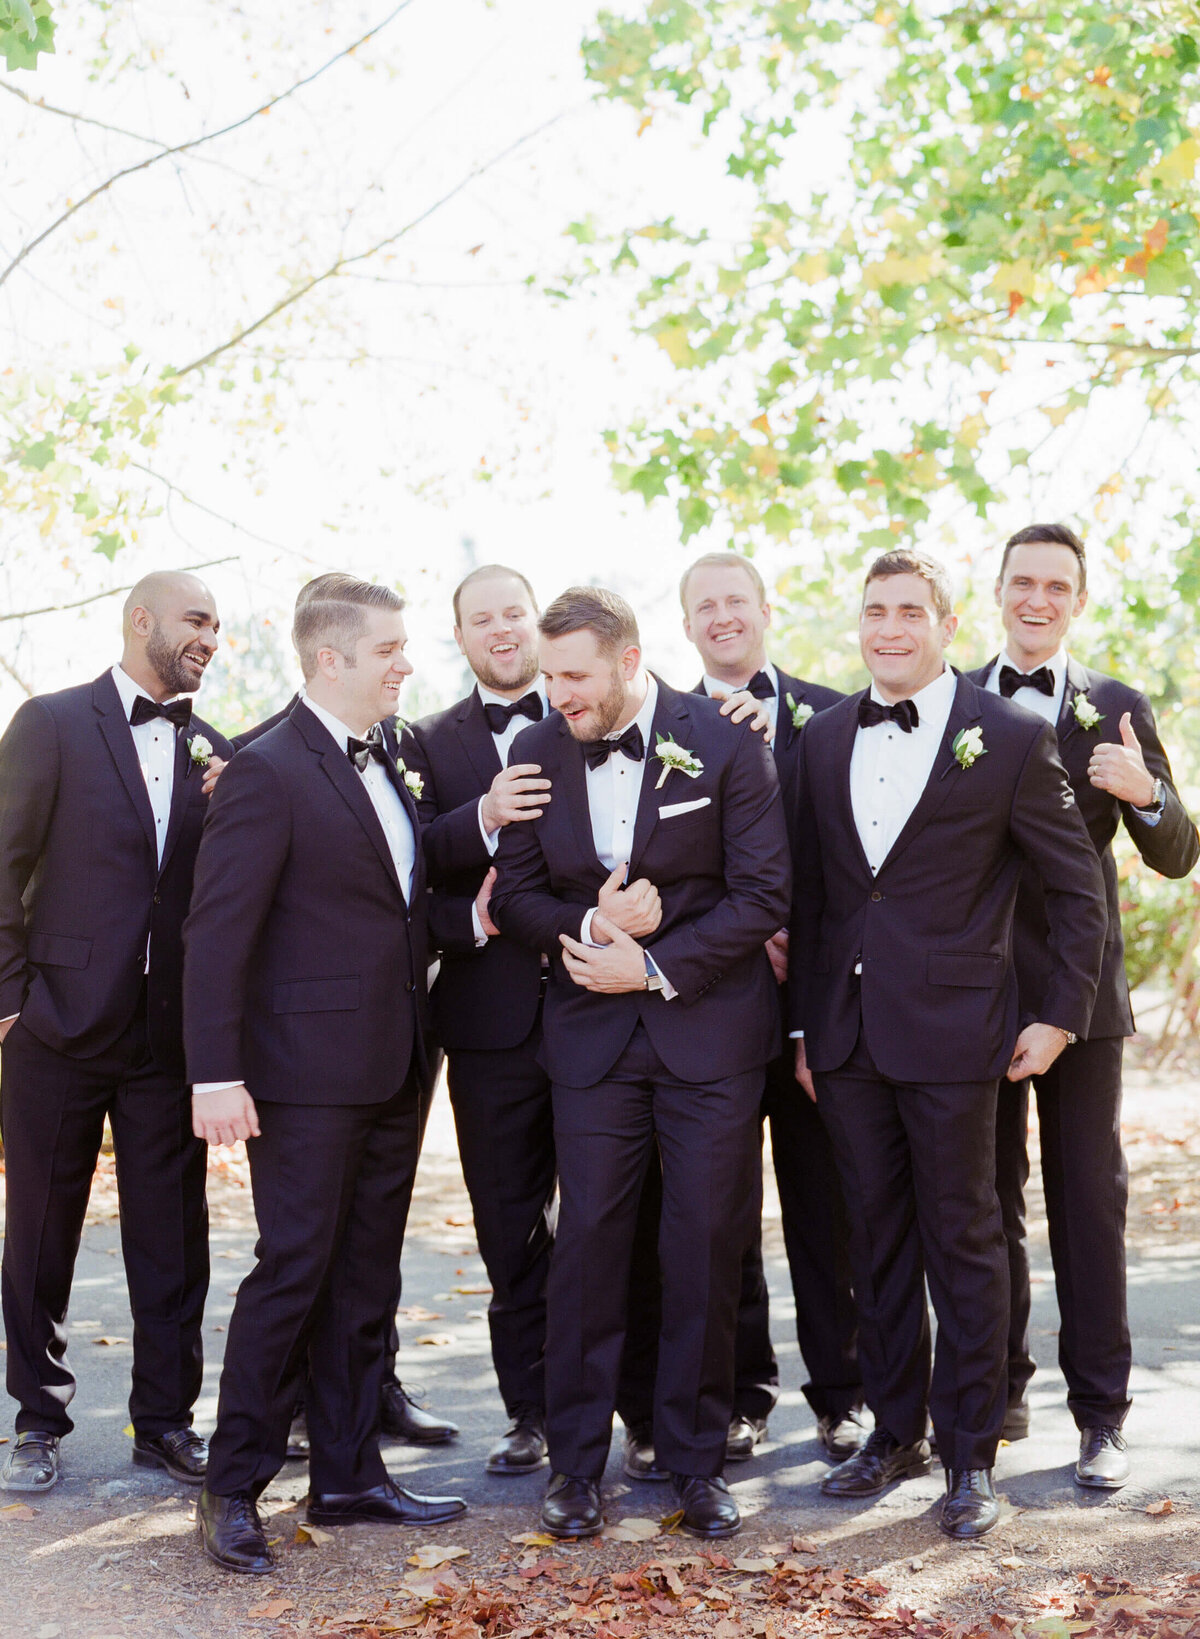 Groom for a vineyard wedding shares a moment of laughter with his best men. Pictured by Vineyard Wedding Photographer Robin Jolin.